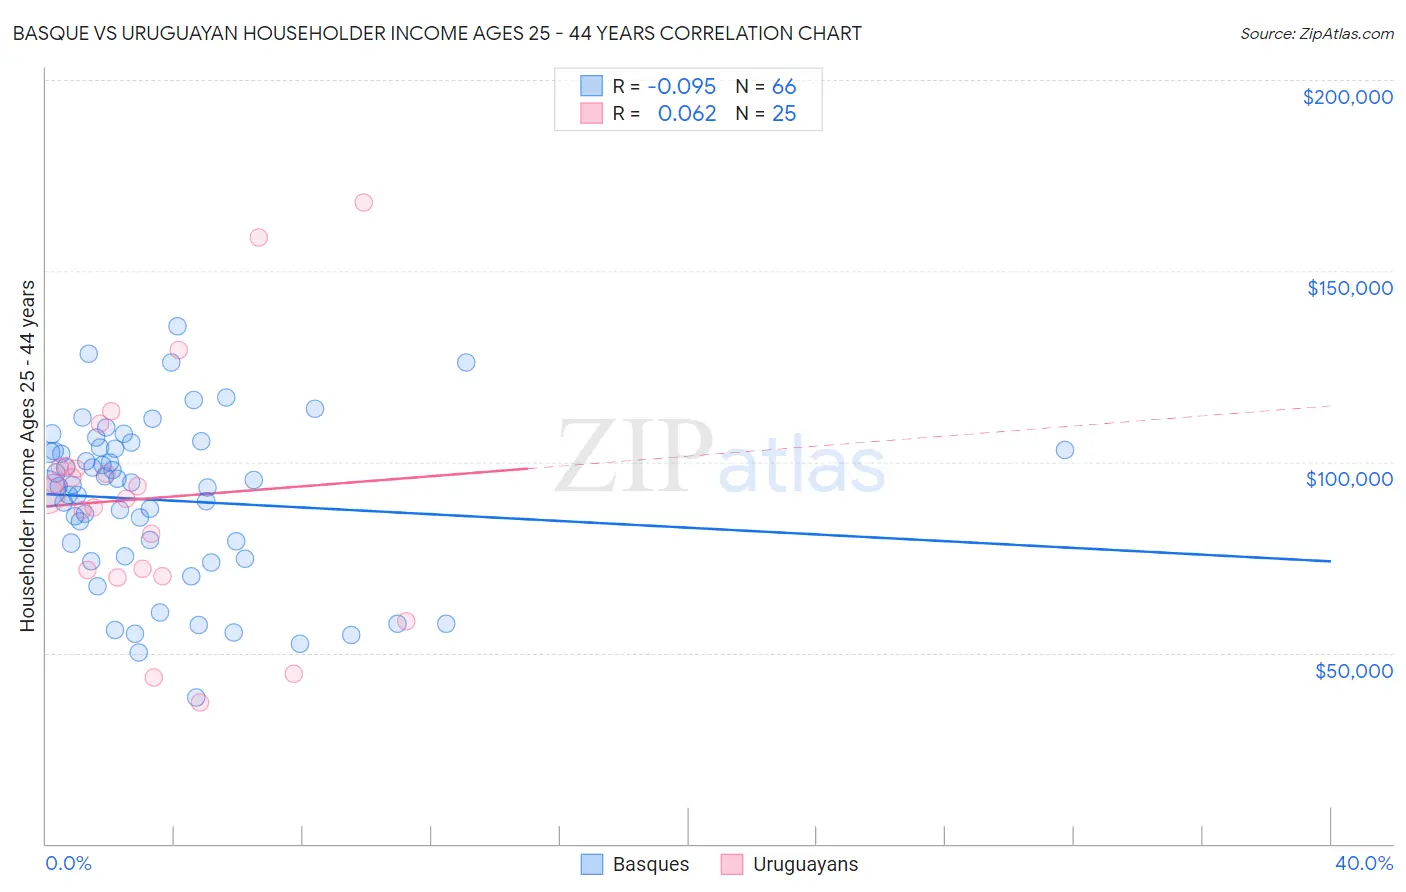 Basque vs Uruguayan Householder Income Ages 25 - 44 years